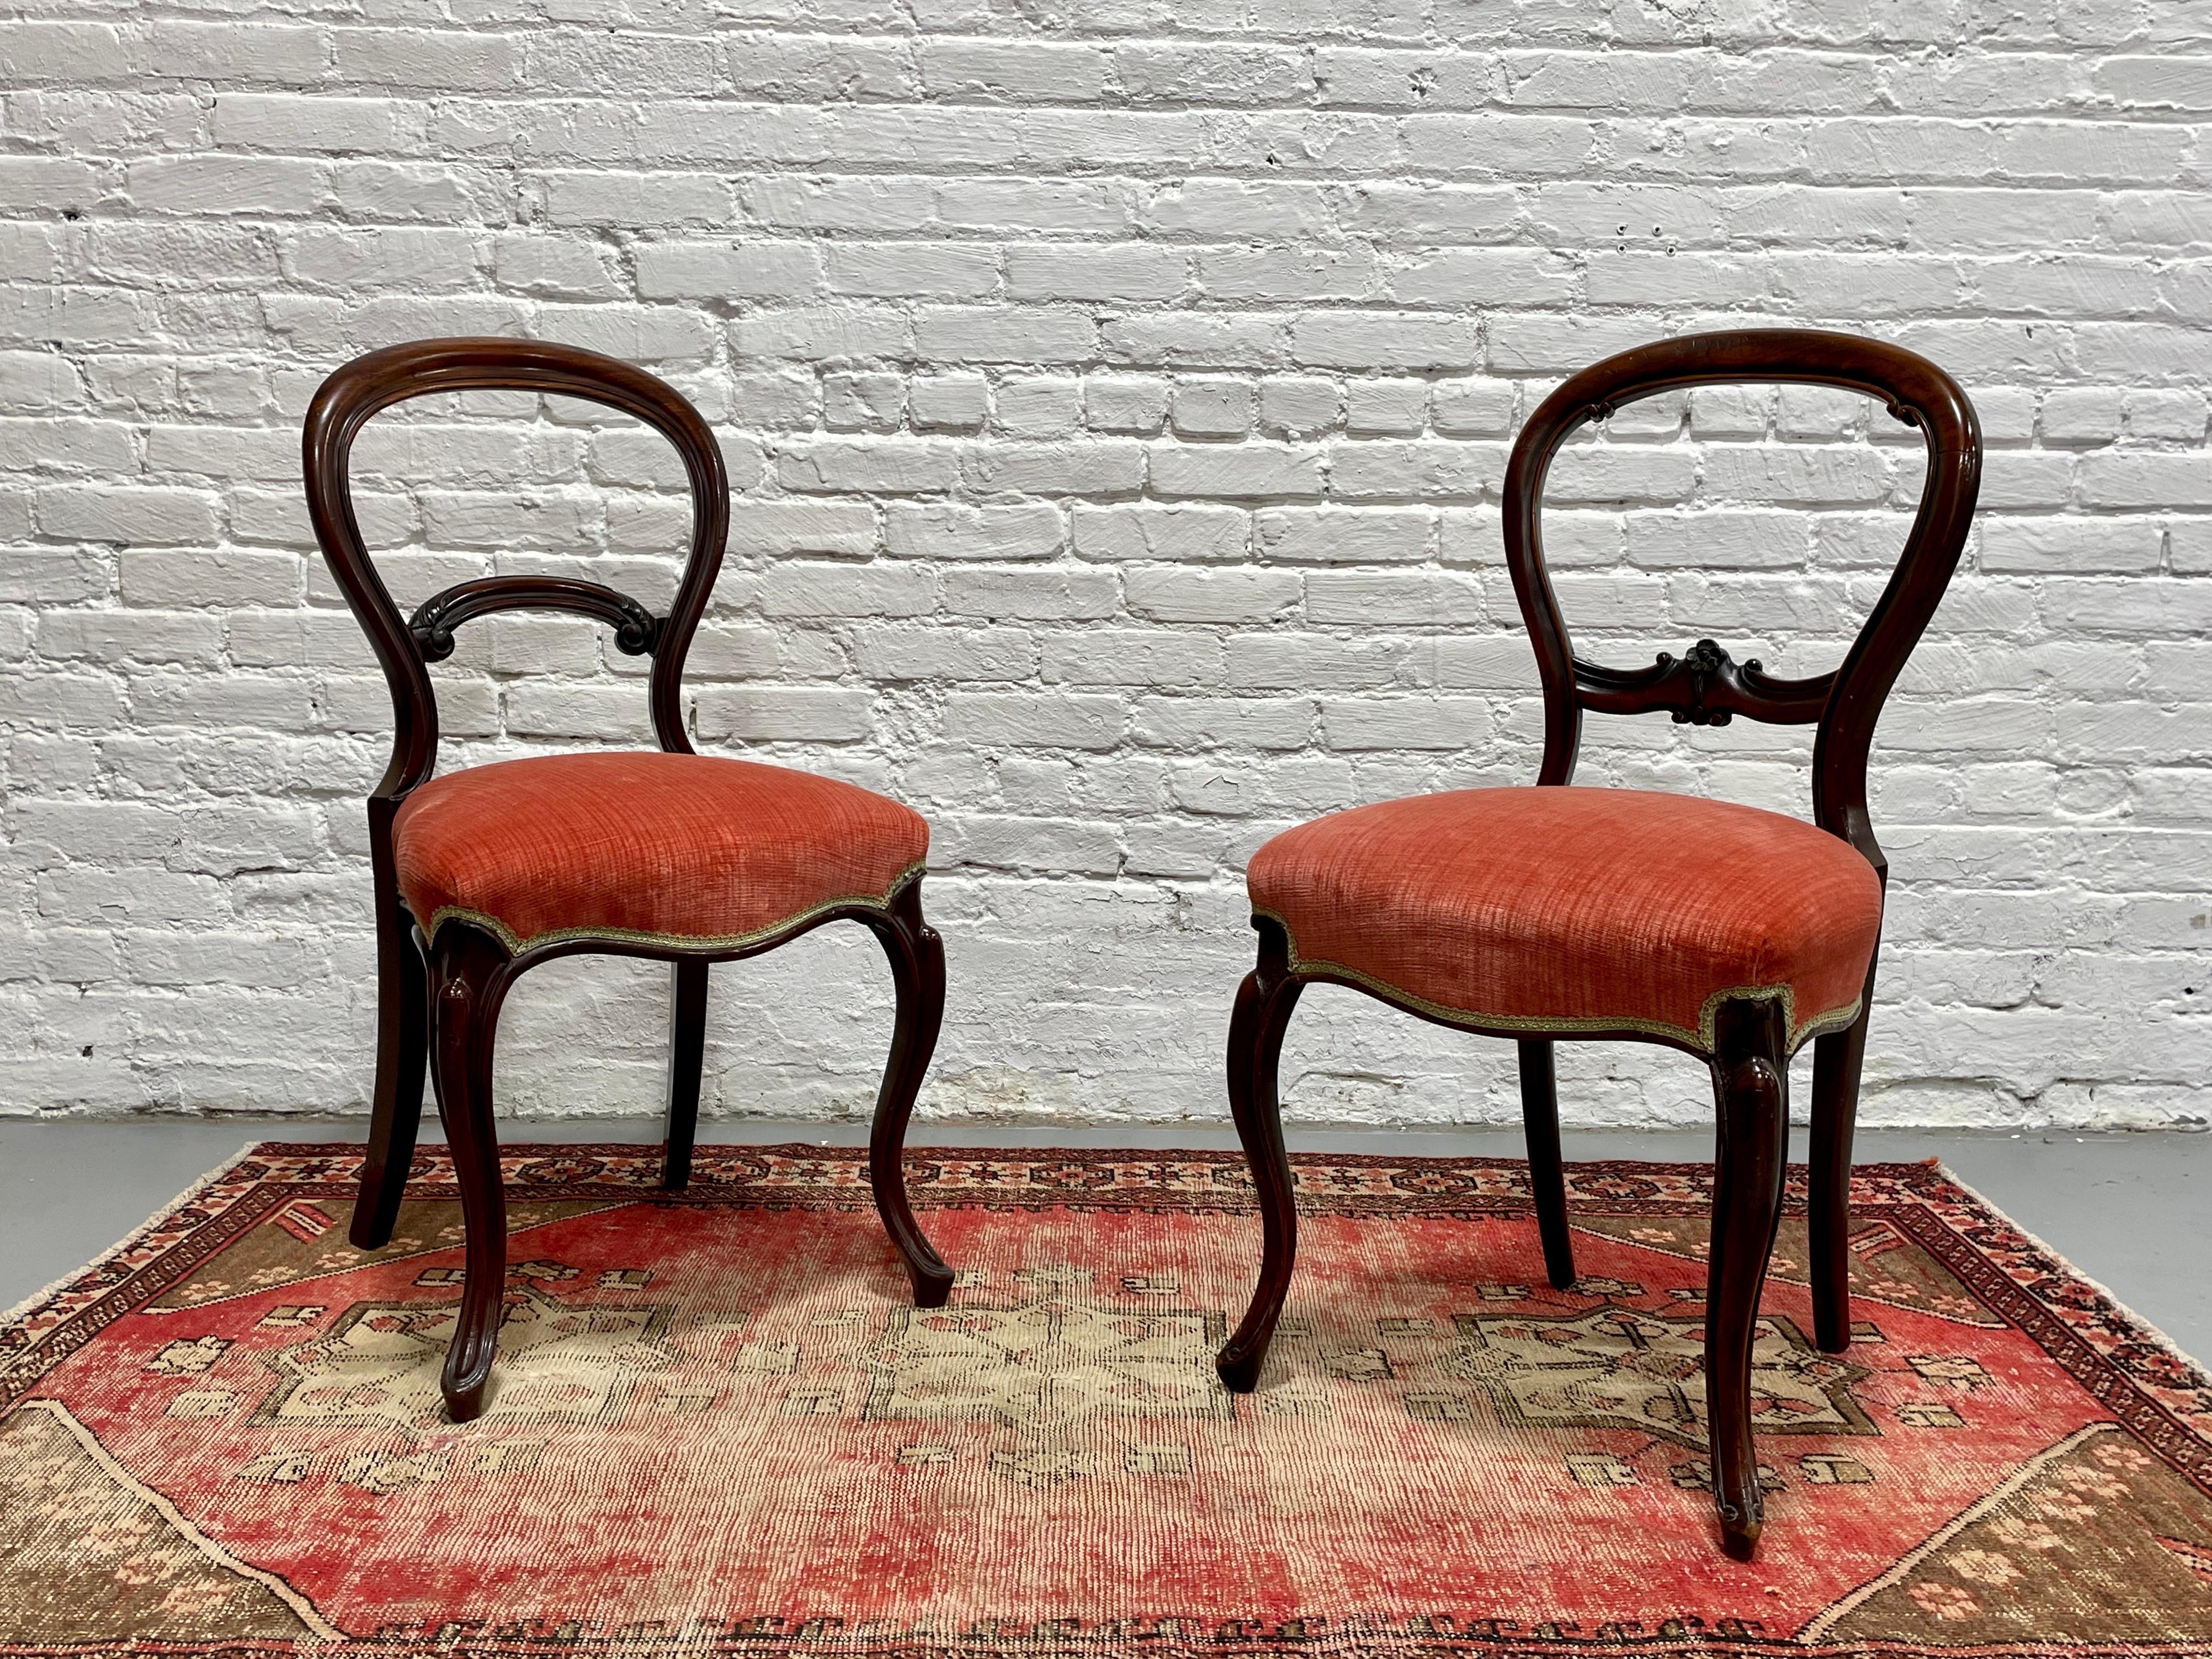 Pair of Antique Solid Mahogany Victorian Balloon Chairs, c. 1870’s. Beautifully carved detailing along the back of each chair which differs slightly between the two chairs. The seats have been reupholstered in a lovely pink soft velvet which